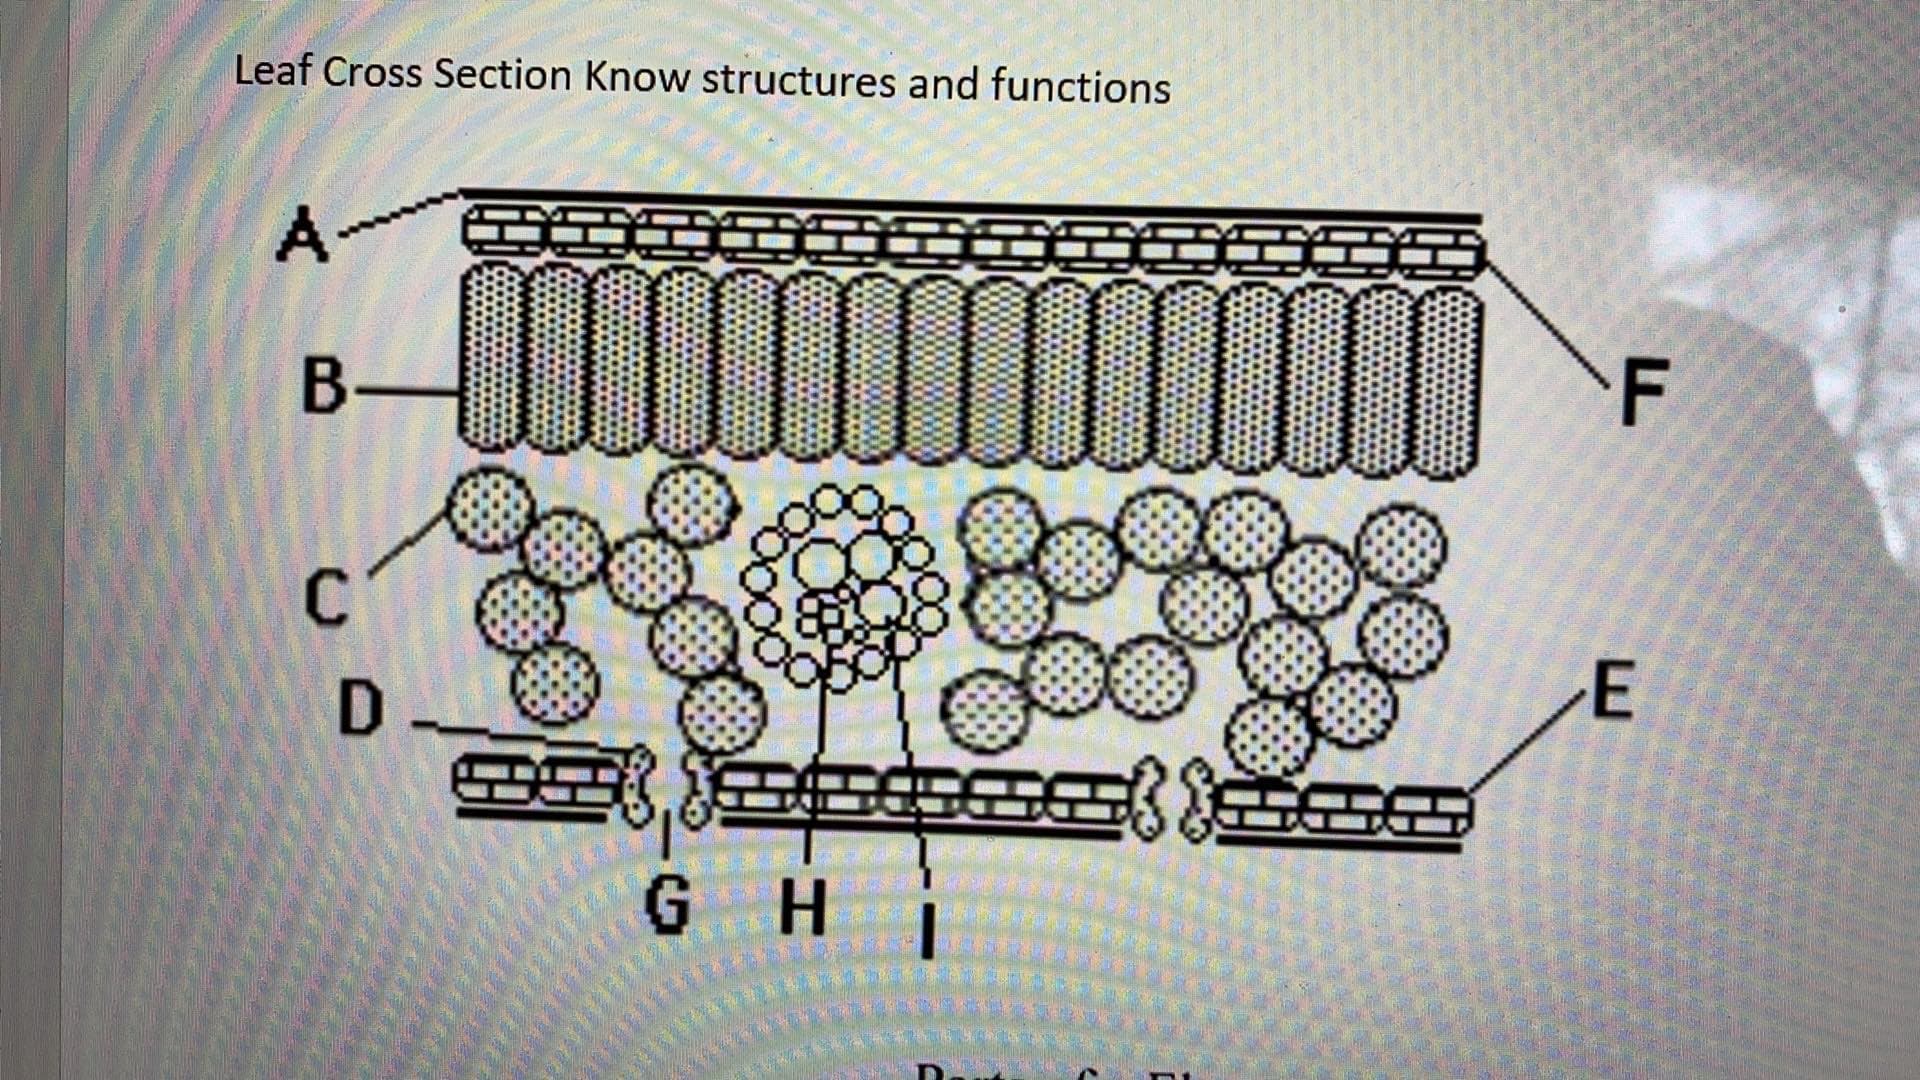 Leaf Cross Section Know structures and functions
A-
GH
